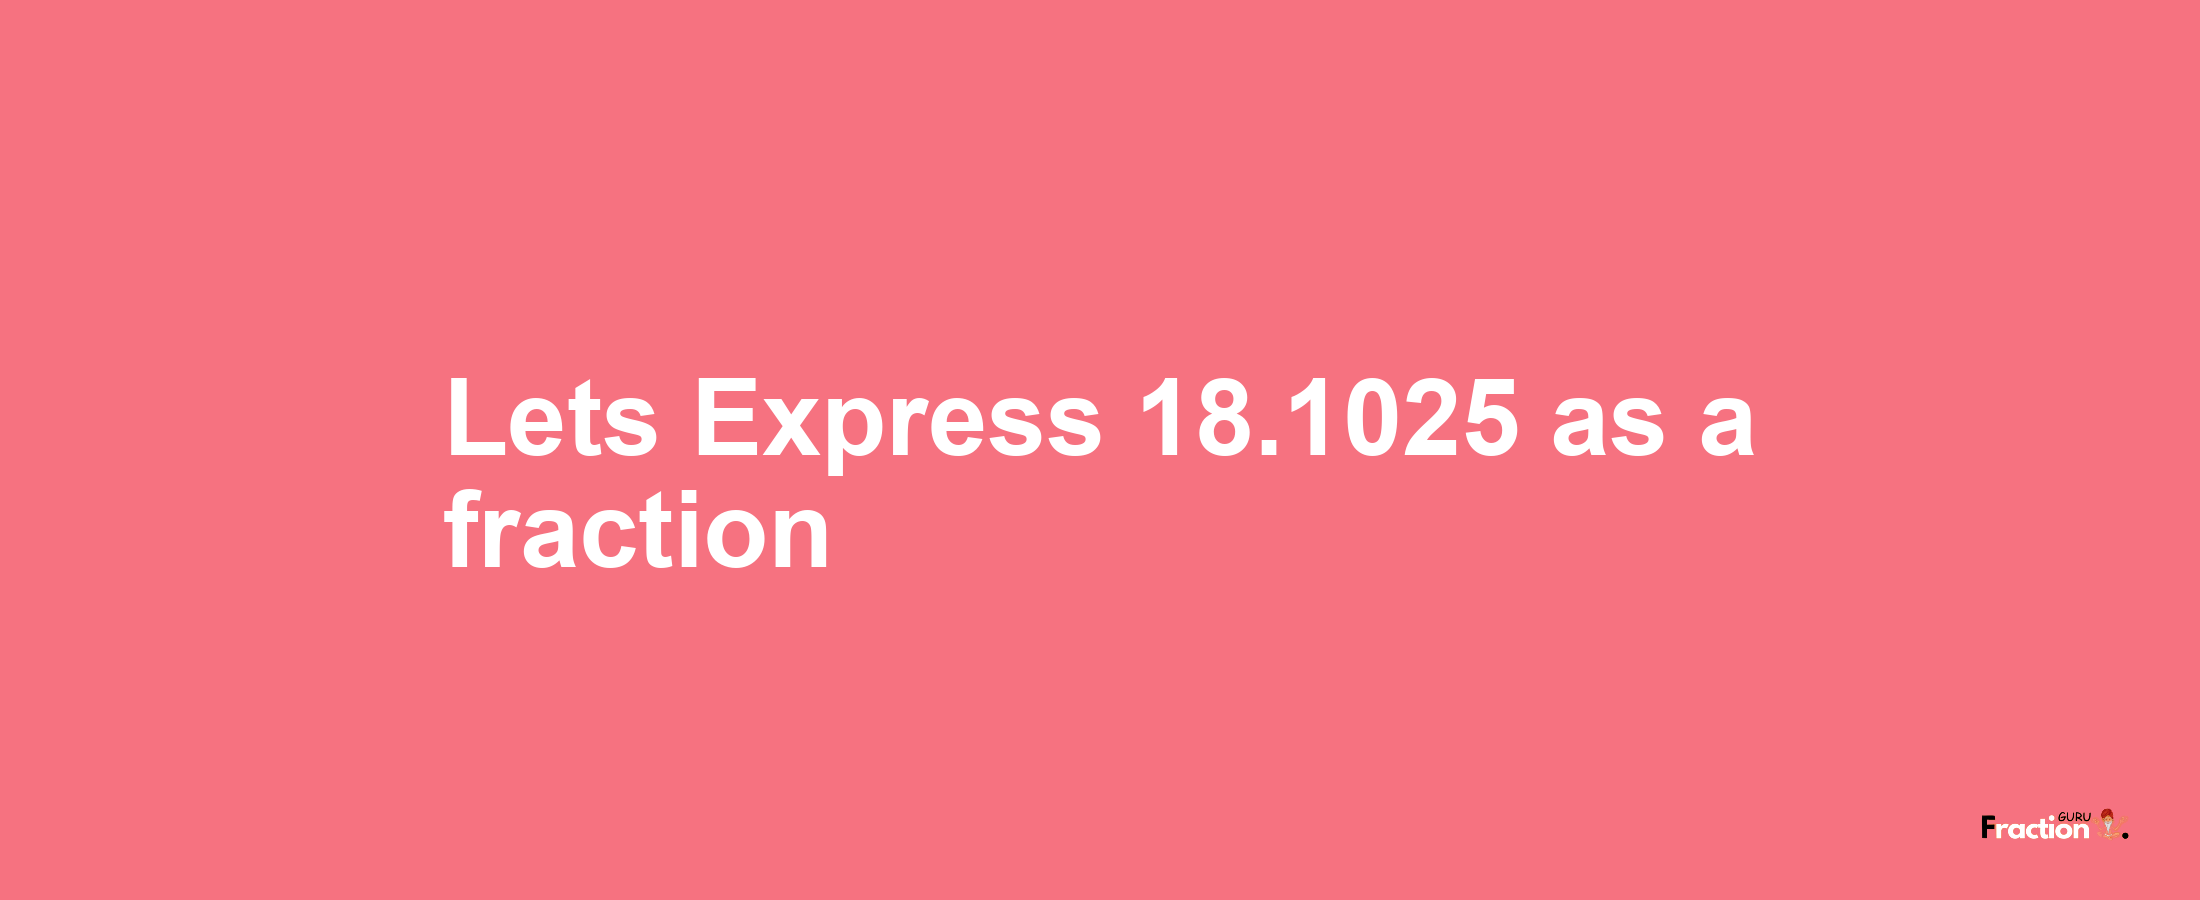 Lets Express 18.1025 as afraction